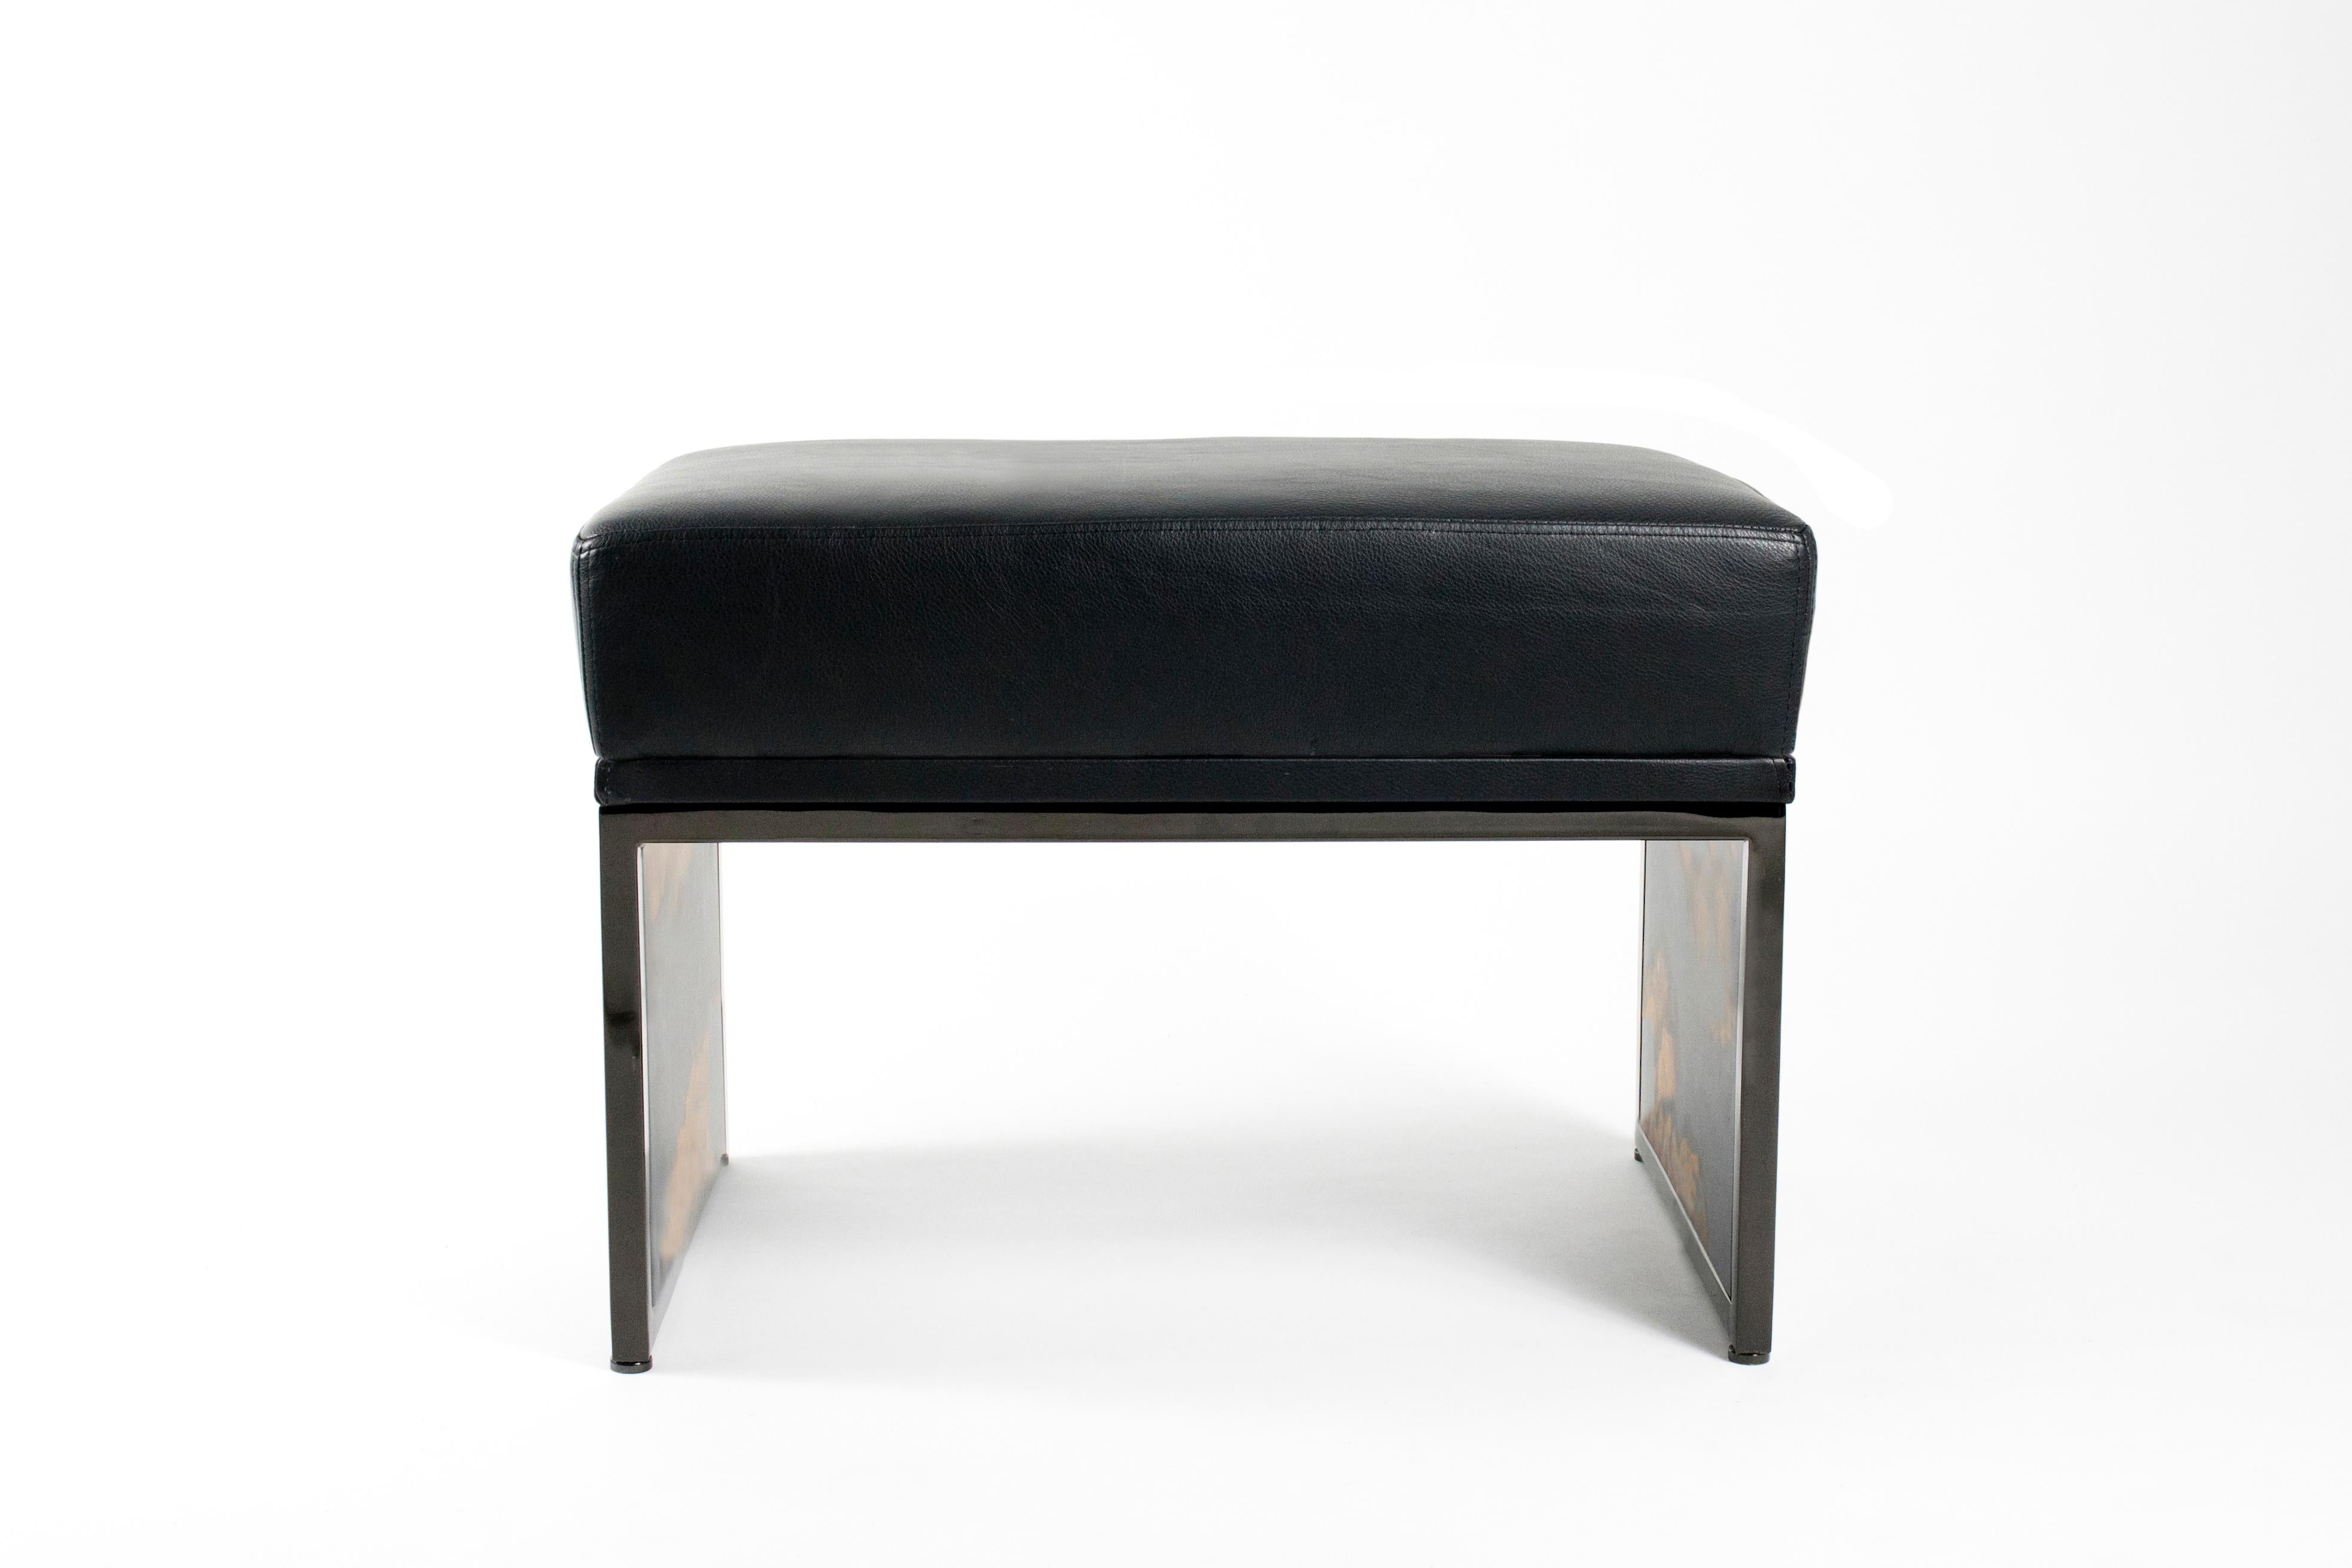 Pastrana Bench is the perfect mate to accompany your piano, Cello or Guitar and also to match in any interior design . Design your own Stool by choosing between several velvet colors, leather or eco-leather. Kaunus offers a complete customization